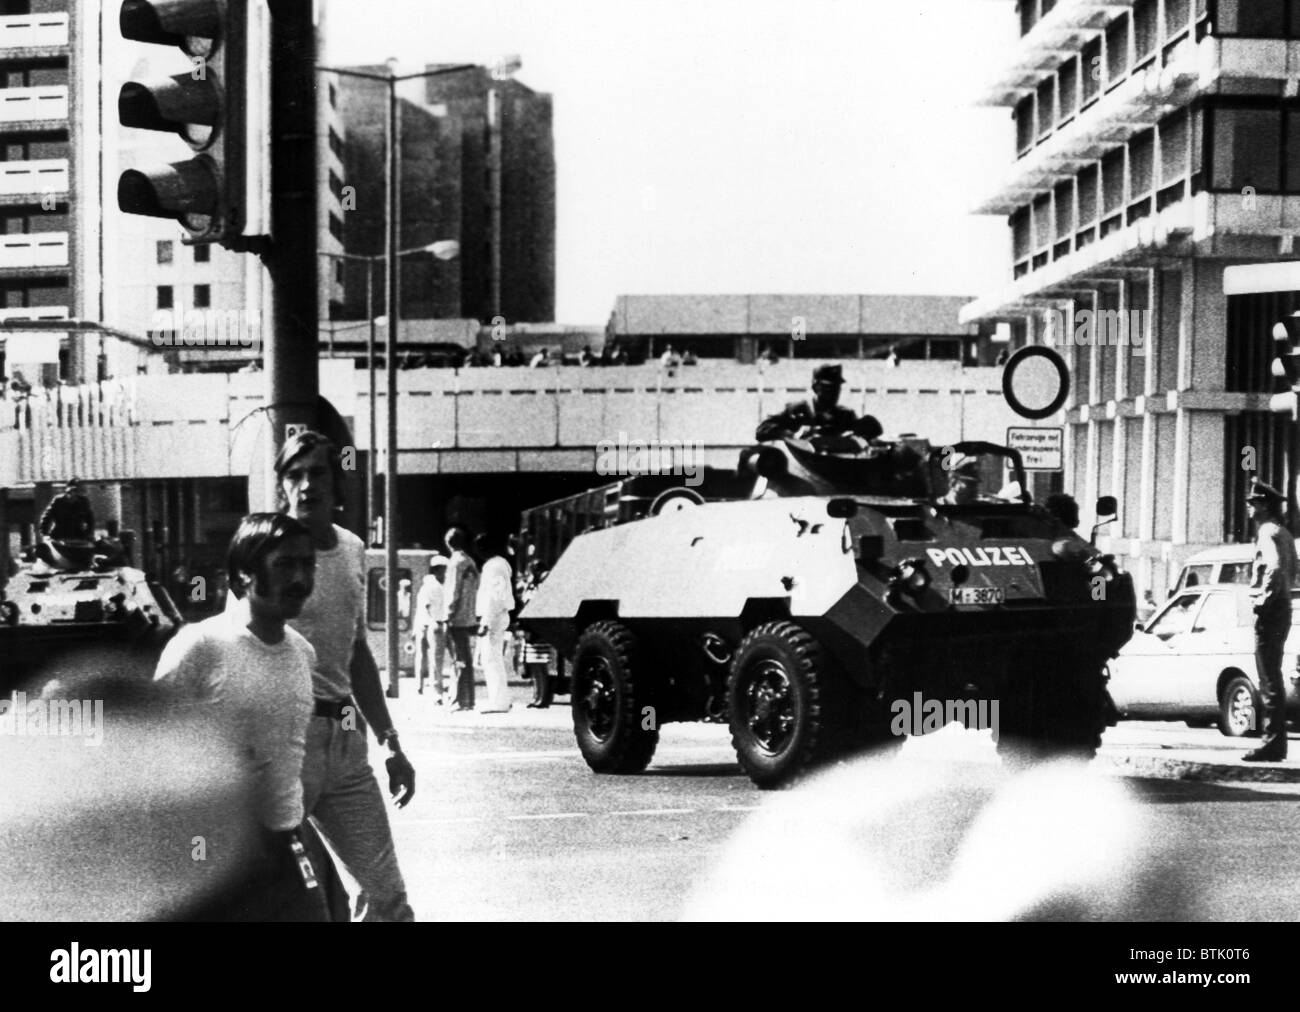 1972 Olympics, West German Police patrol Olympic Village in armored vehicles, Munich, Germany, 09-05-1972. Stock Photo